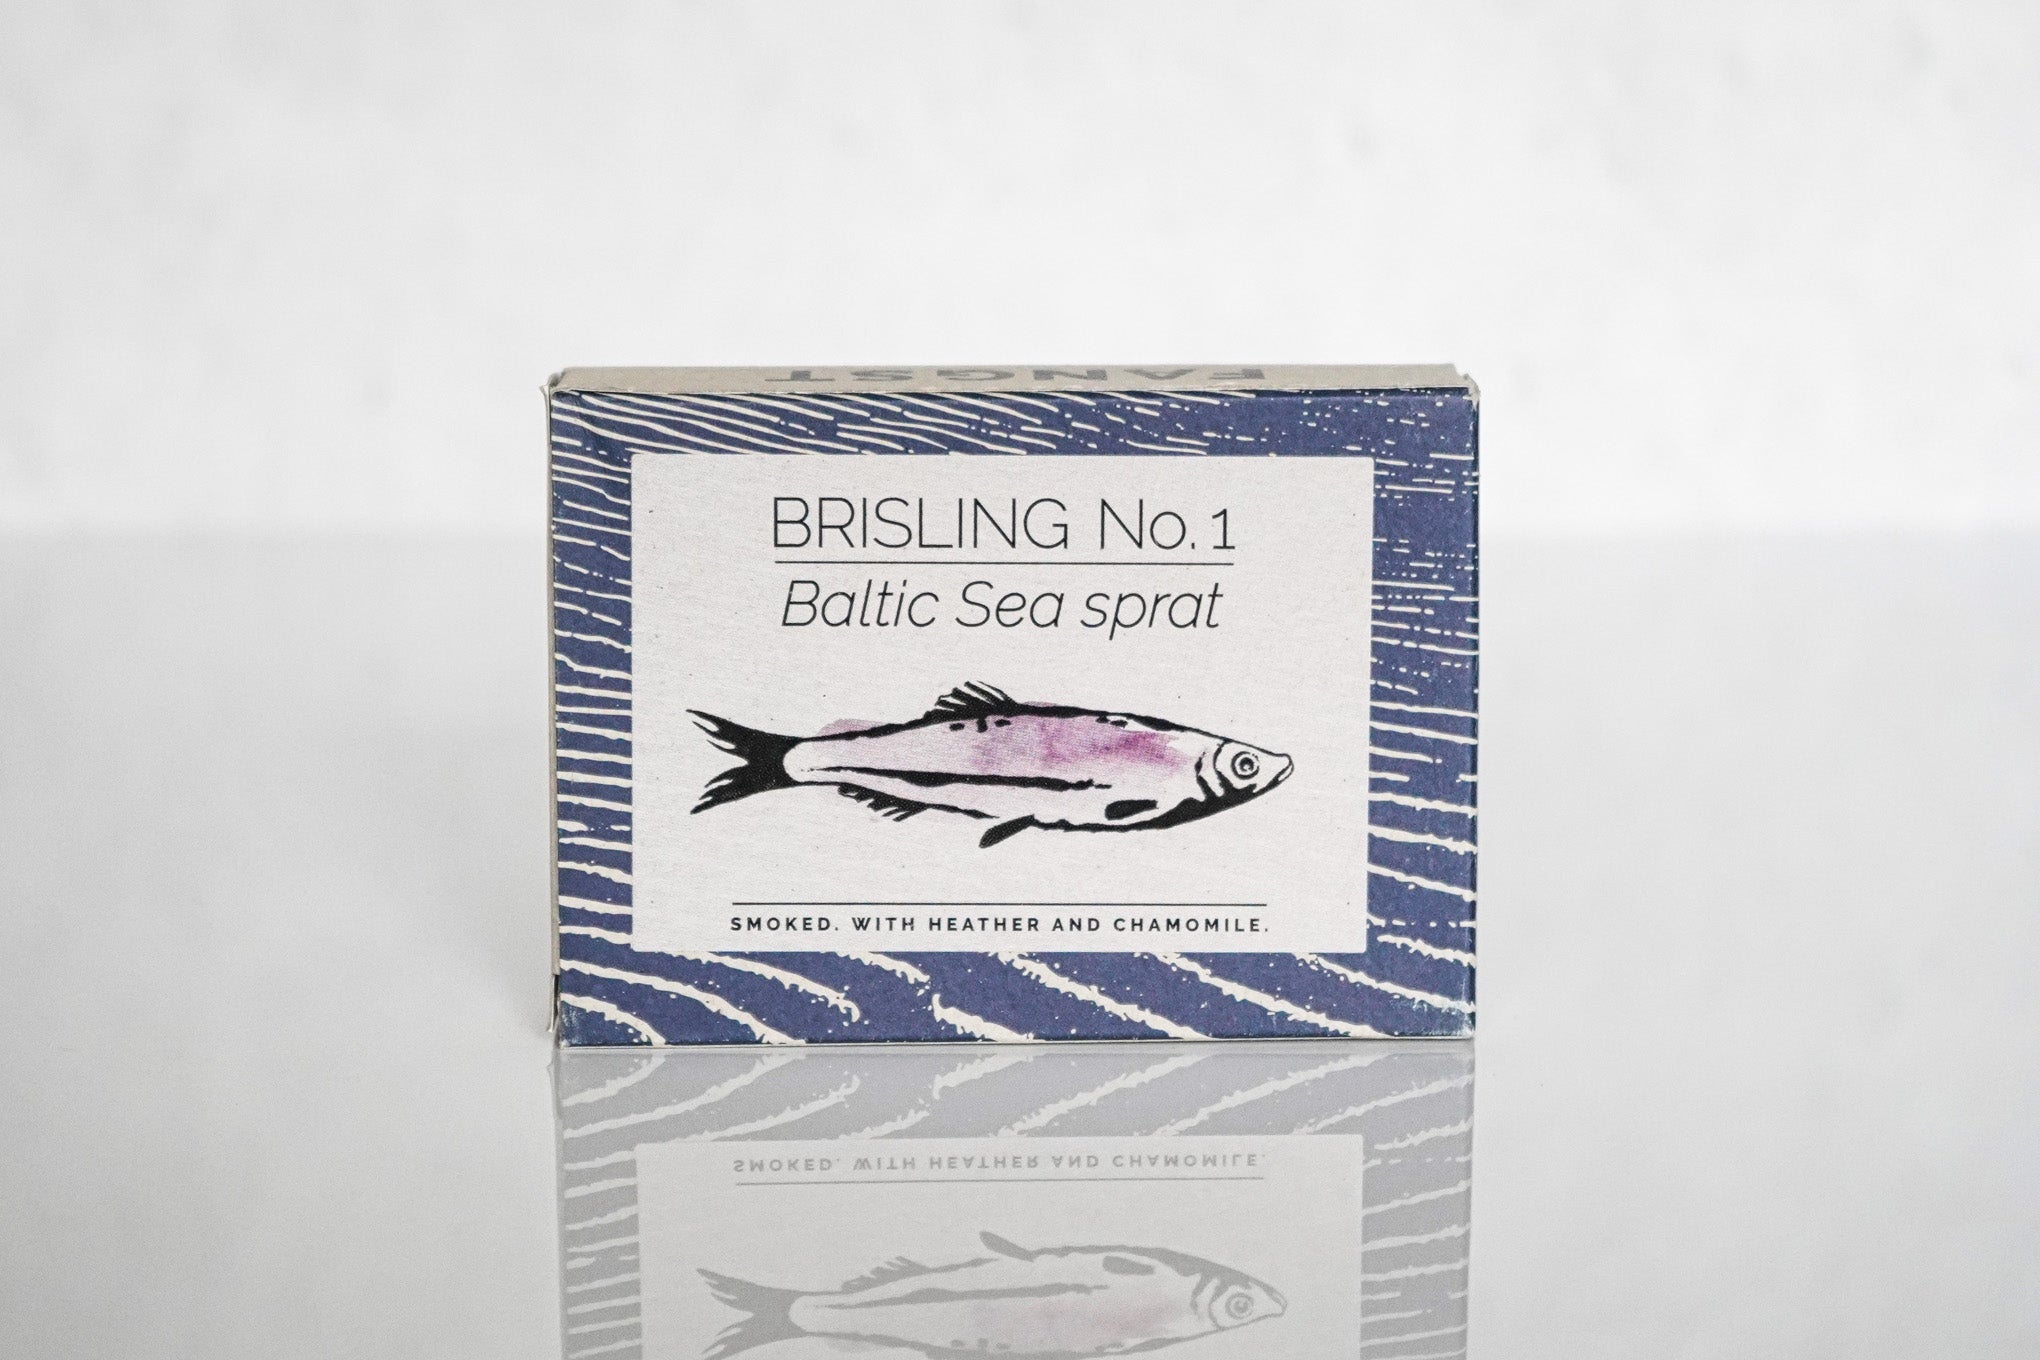 Fangst brisling no 1 Baltic Sea Sprat smoked with heather and chamomile box